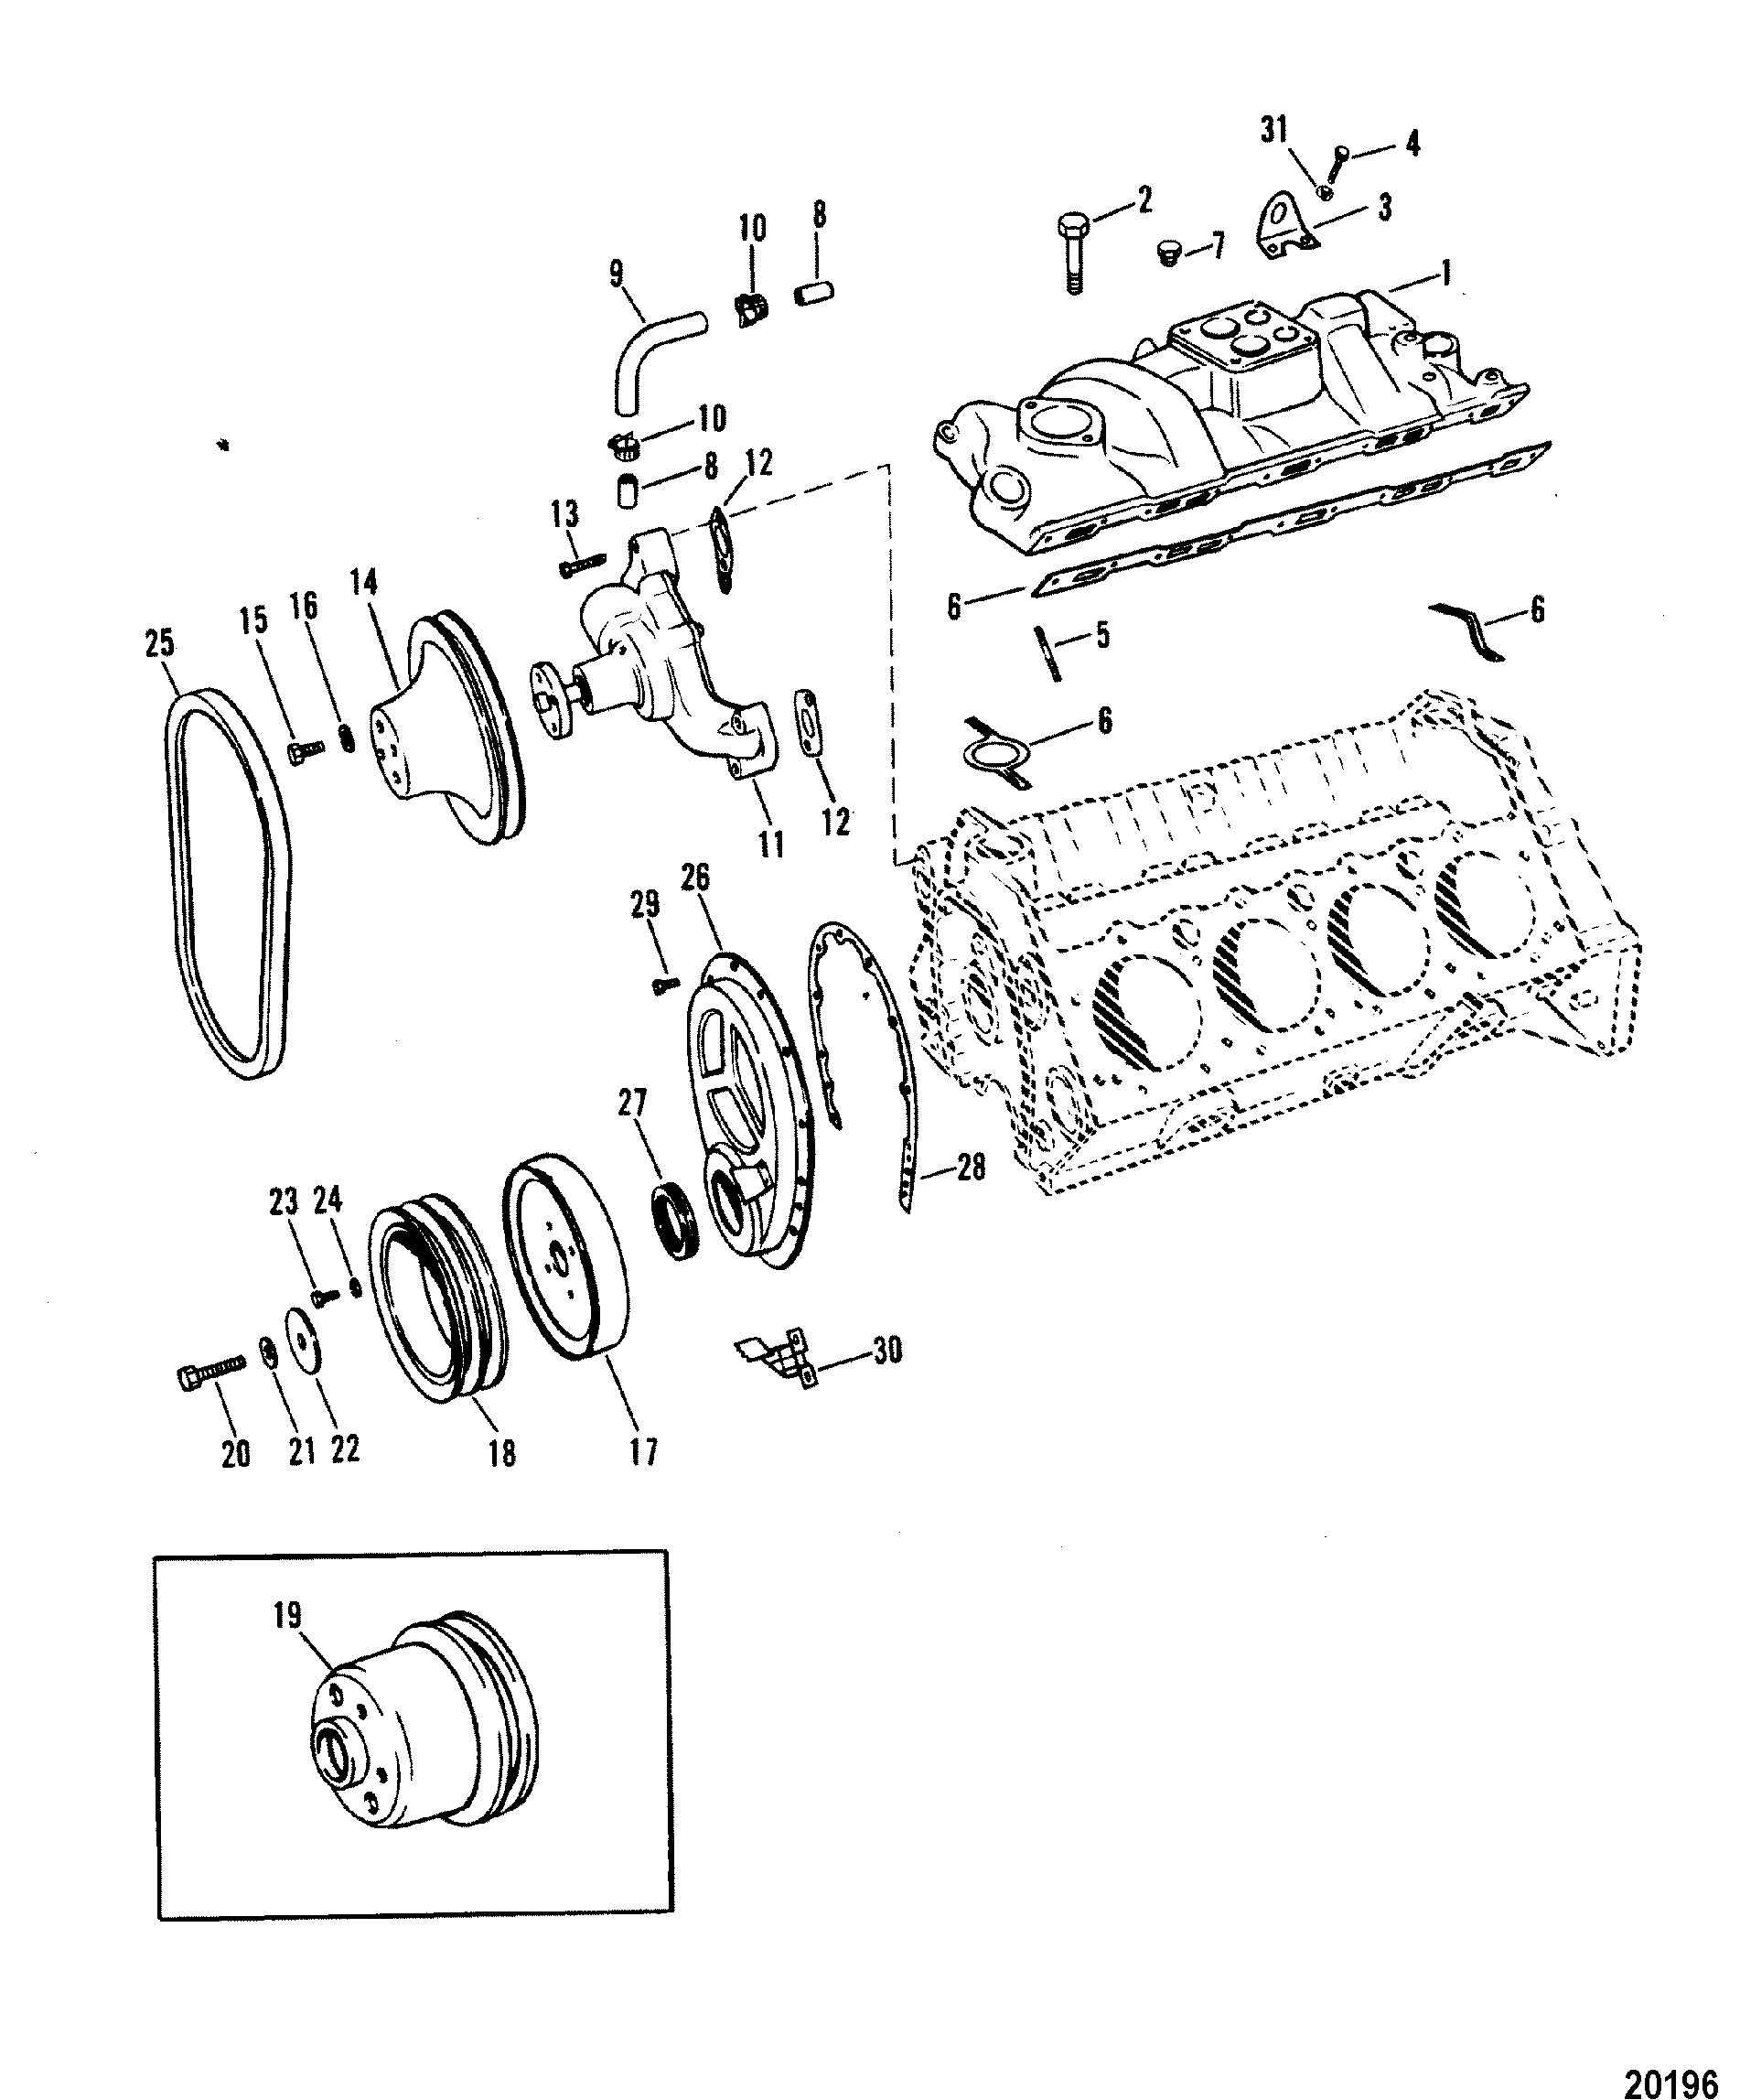 Intake Manifold and Front Cover(Stamped Crankshaft Pulley)